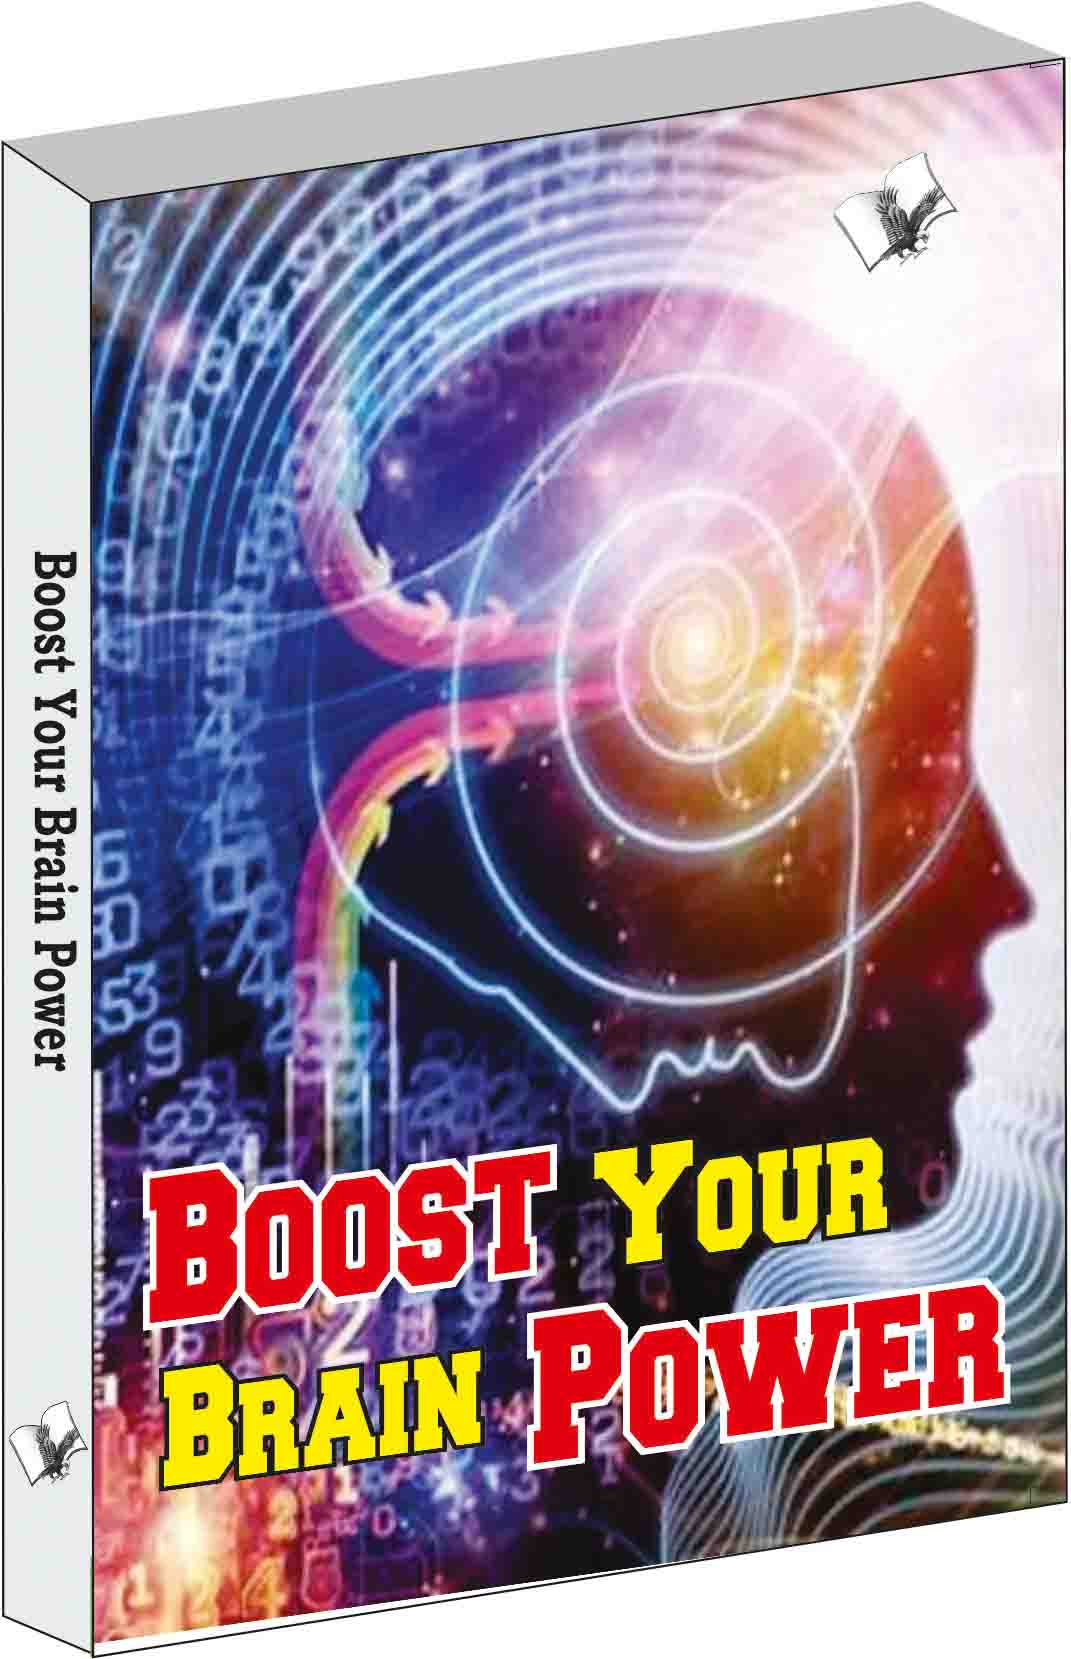 Boost your brain power-Smart ways to score high in exams